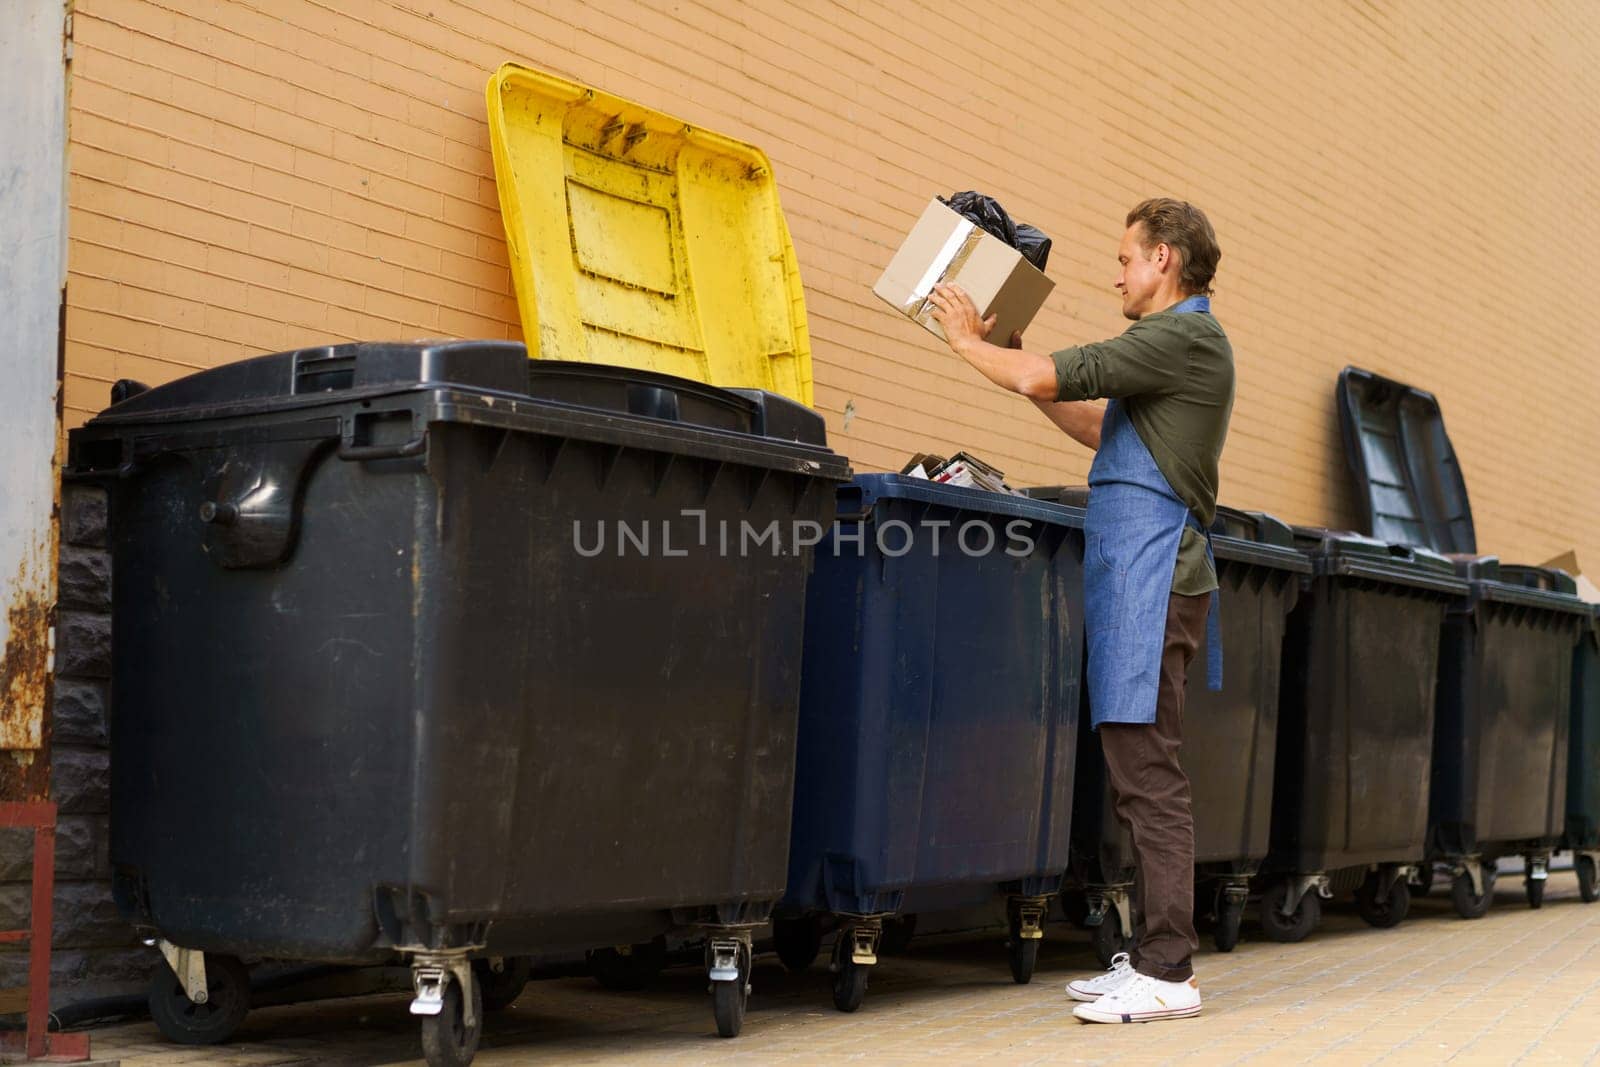 Diligent kitchen worker or waiter is seen responsibly disposing of garbage in city trash can. With sense of responsibility and cleanliness, he ensures proper waste management in urban environment. by LipikStockMedia